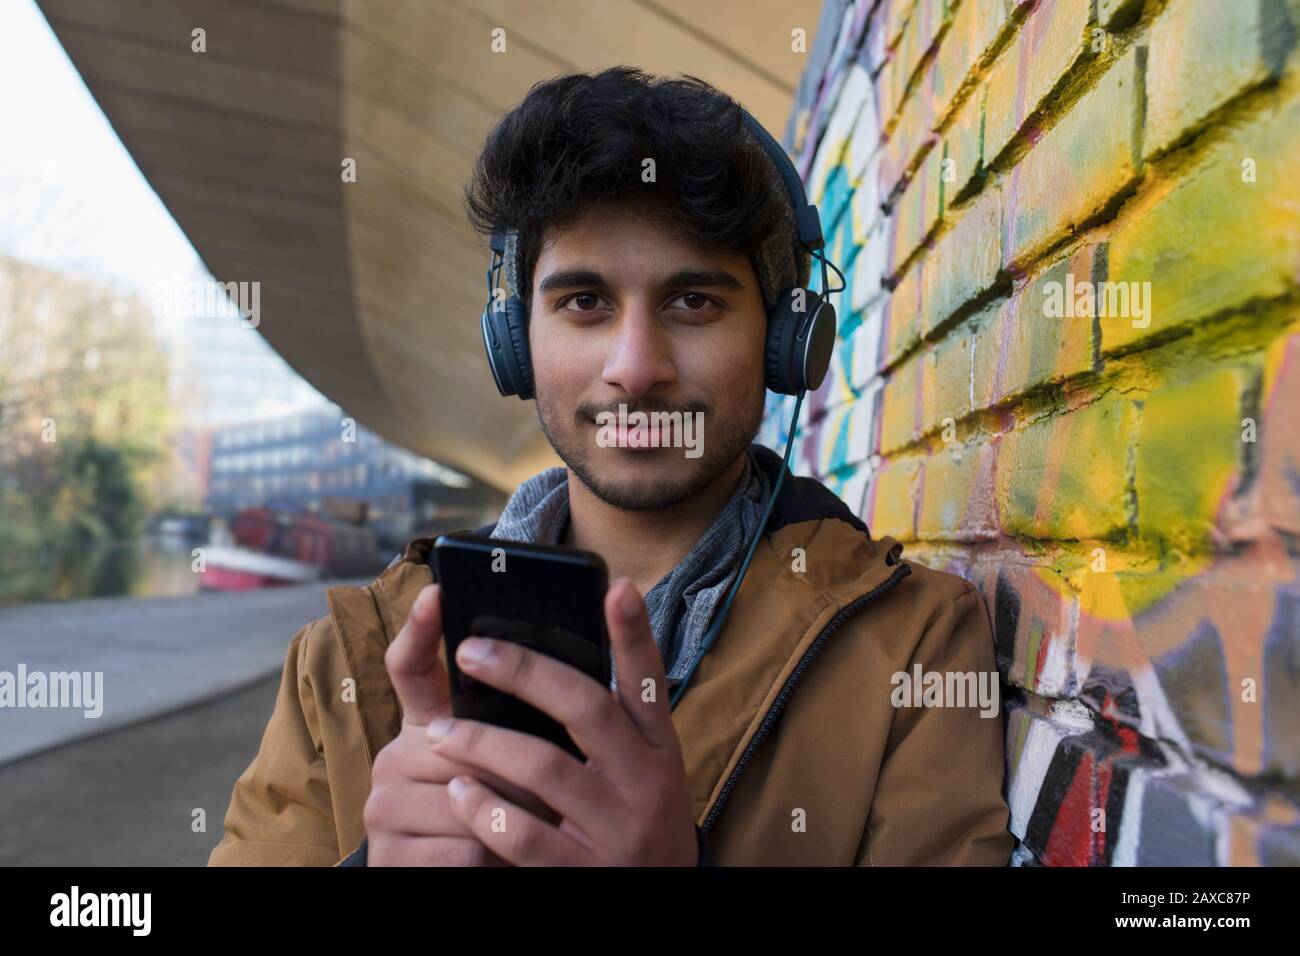 Portrait confident young man listening to music with headphones and mp3 player Stock Photo